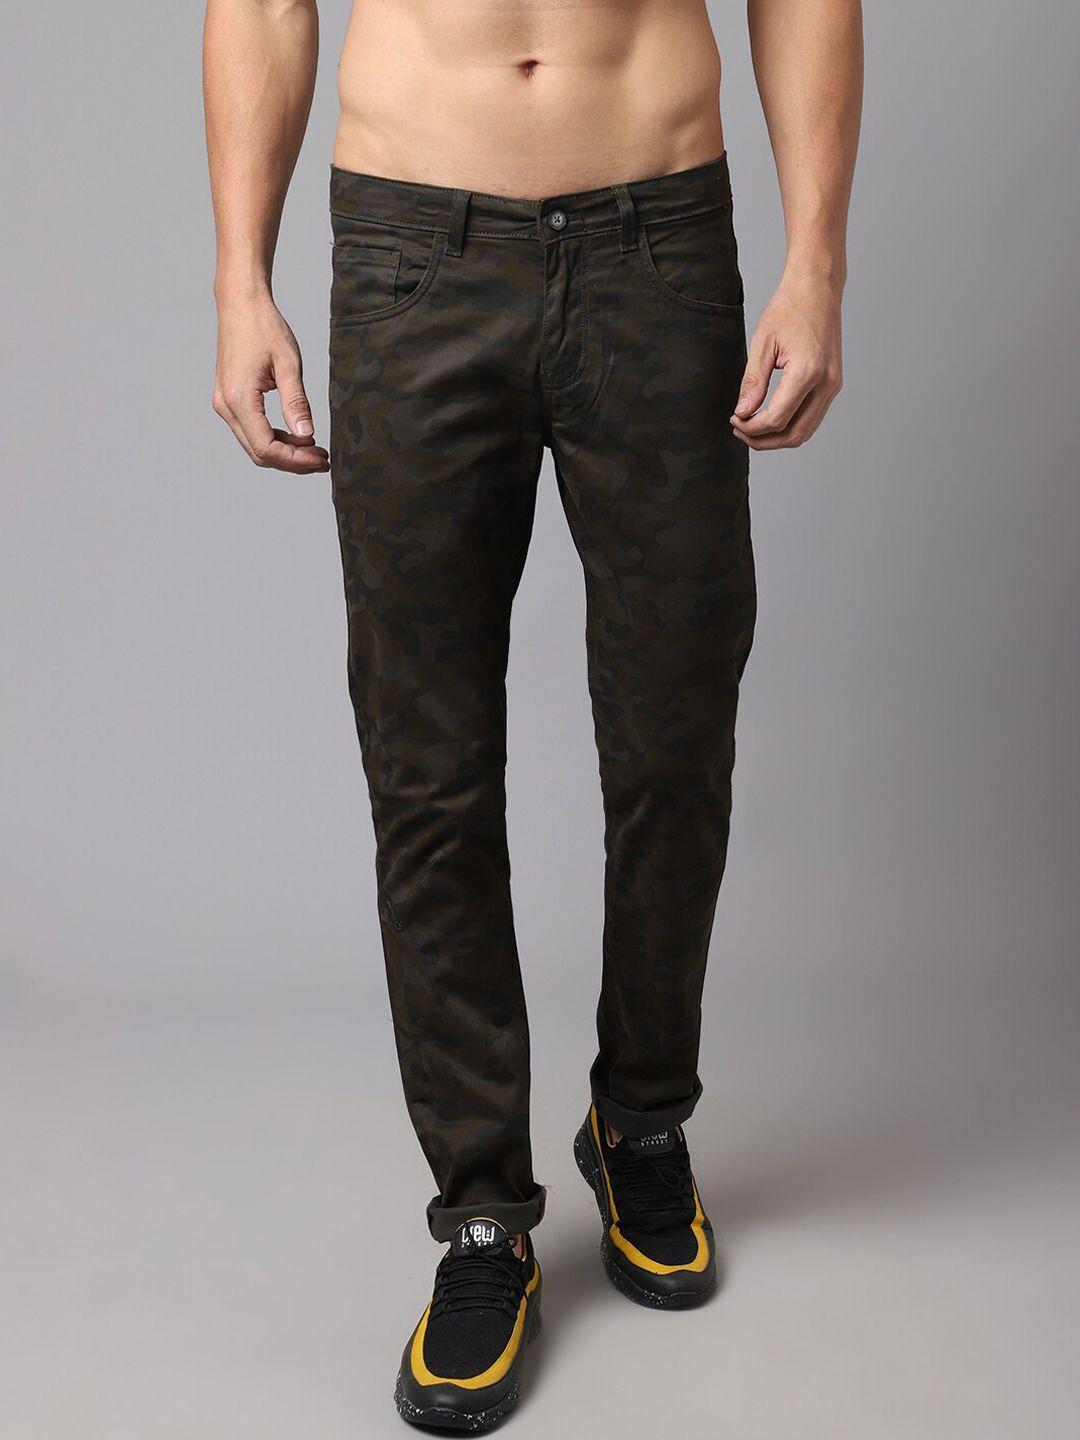 cantabil-men-brown-camouflage-printed-chinos-trousers